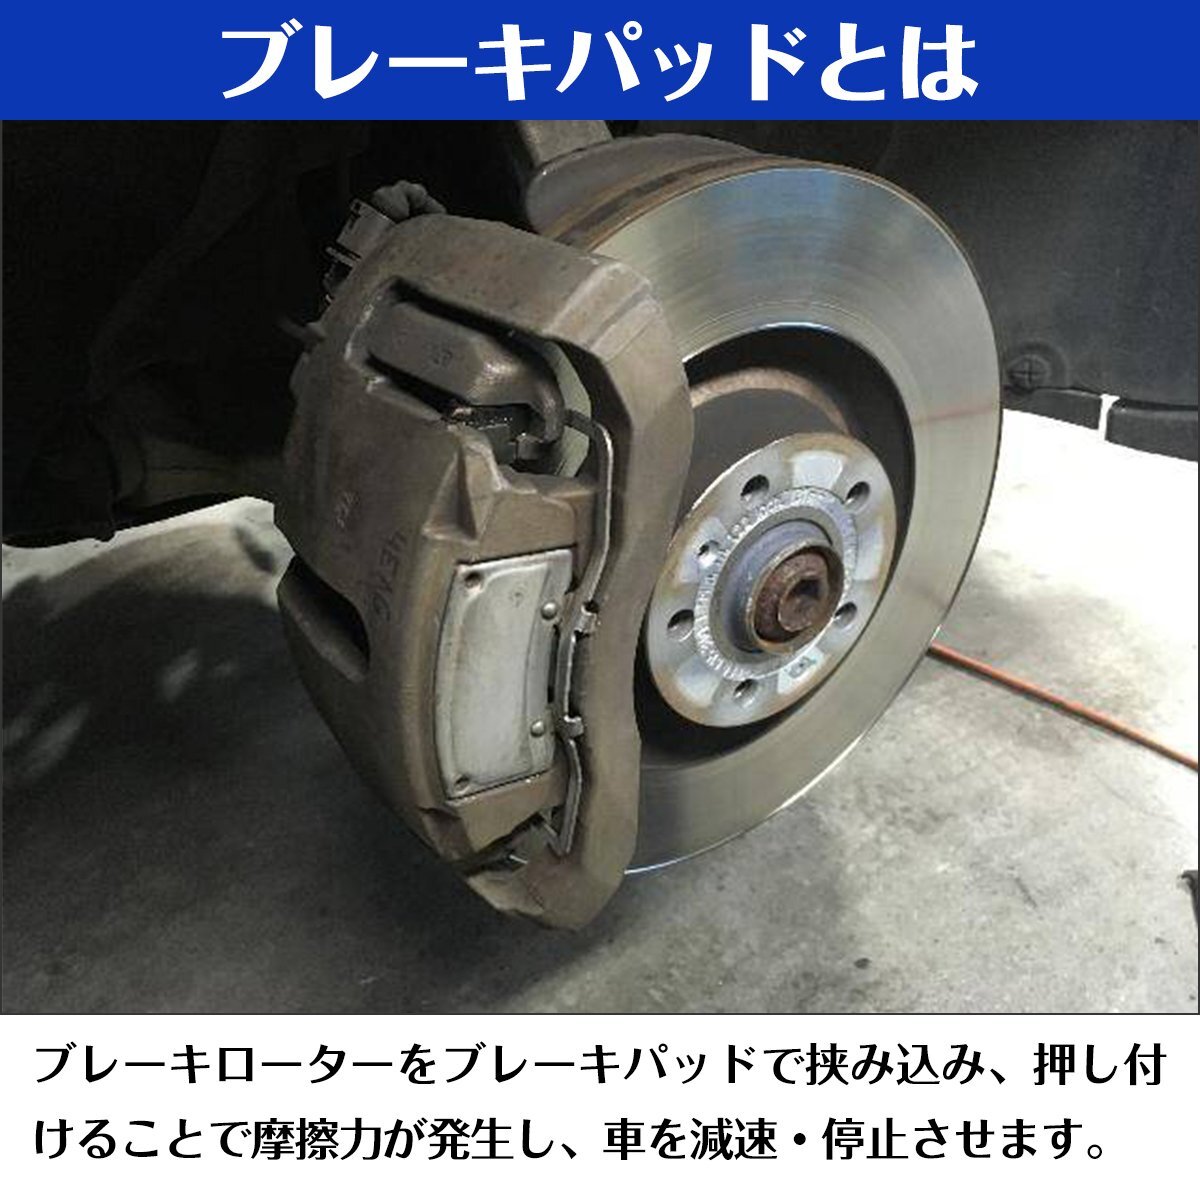 [ new goods immediate payment ] Fuga Y51 HY51 KY51 KNY51 4WD rear brake pad left right 4 pieces set NAO material 55800-77K00 44060-8H385 disk pad 